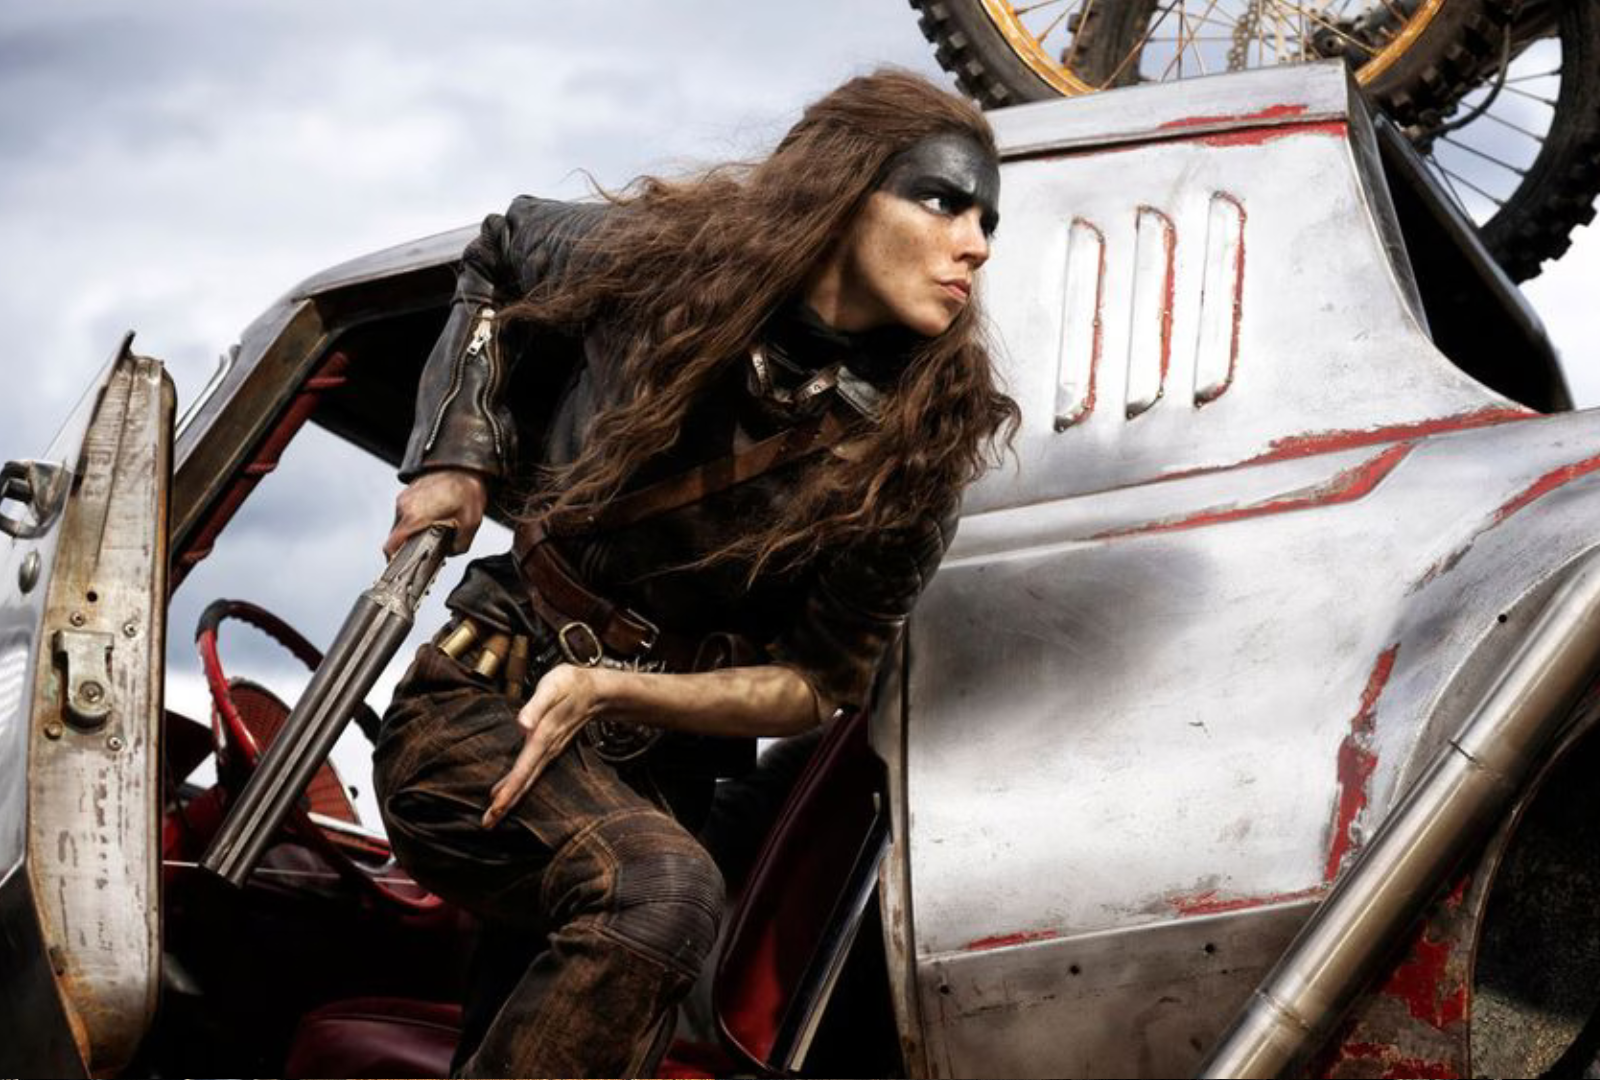 Anya Taylor-Joy as Furiosa in Warner Bros. Pictures’ and Village Roadshow Pictures’ action adventure “FURIOSA: A MAD MAX SAGA,” a Warner Bros. Pictures release. Photo by Jasin Boland